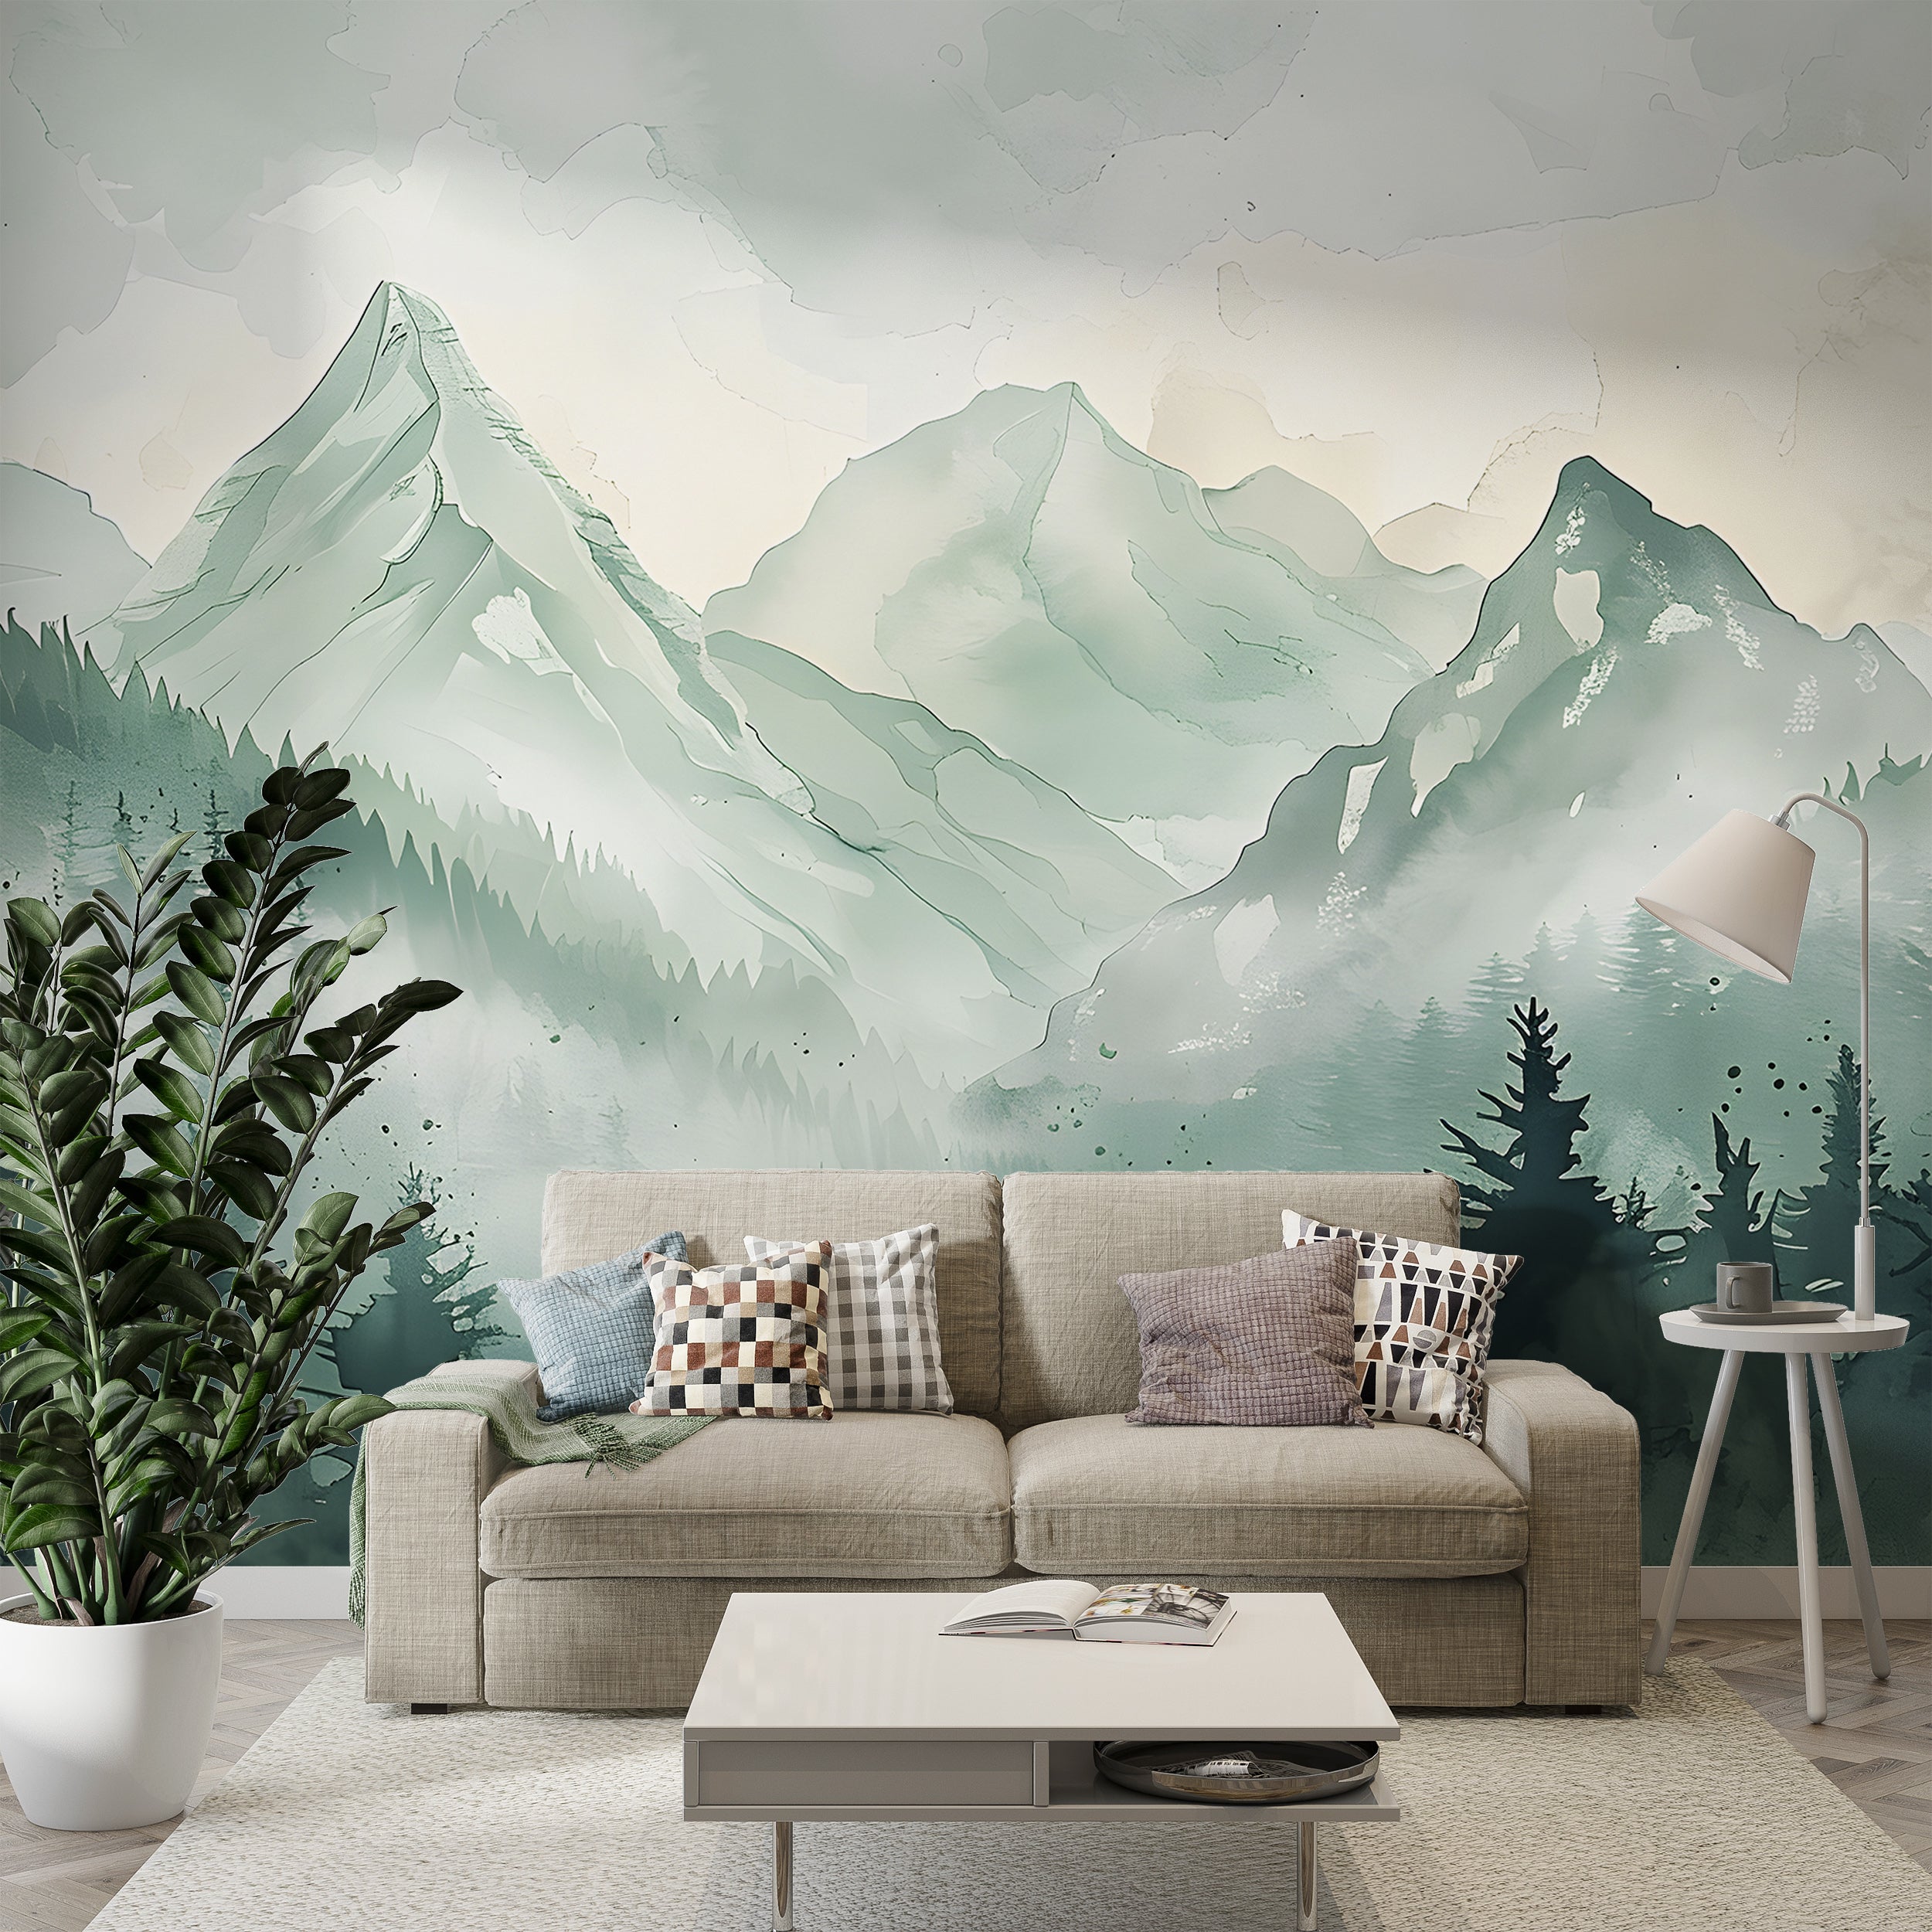 Soft Green Mountains Wallpaper, Watercolor Wild Forest Mural, Self-adhesive Removable Pastel Green Foggy Mountain Landscape Decor